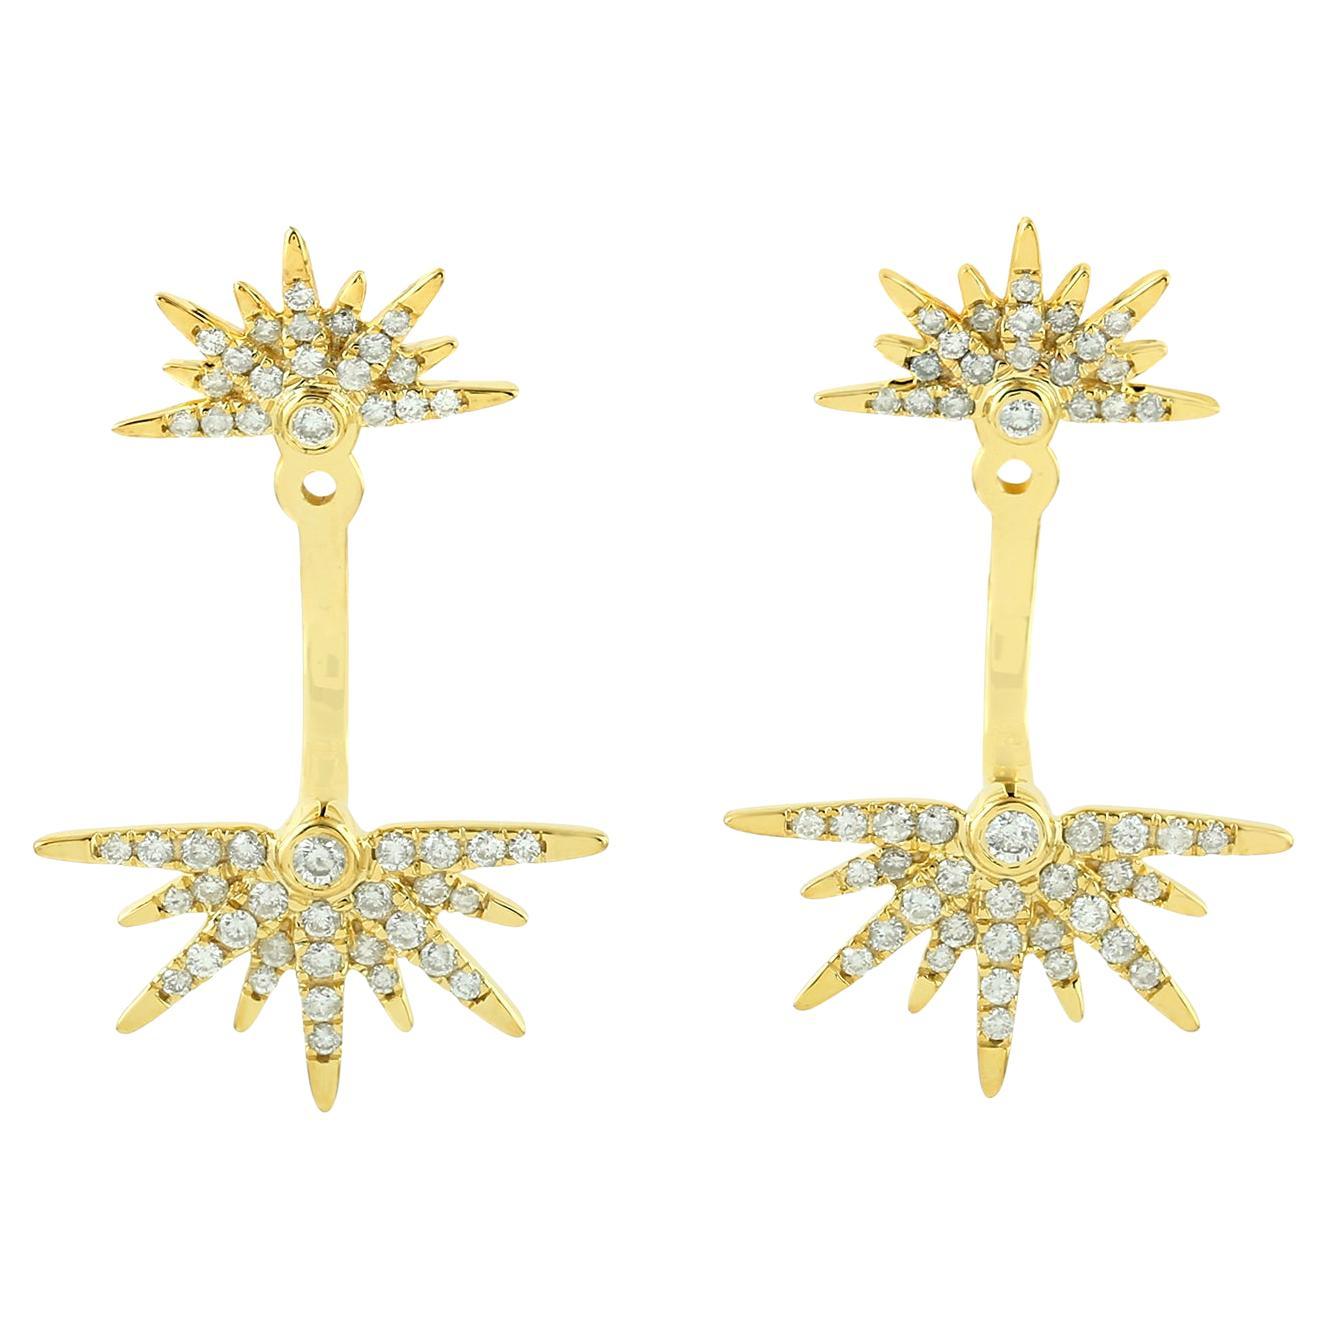 Sunburst Pave Diamond Ear Jackets Made In 14K Yellow Gold For Sale